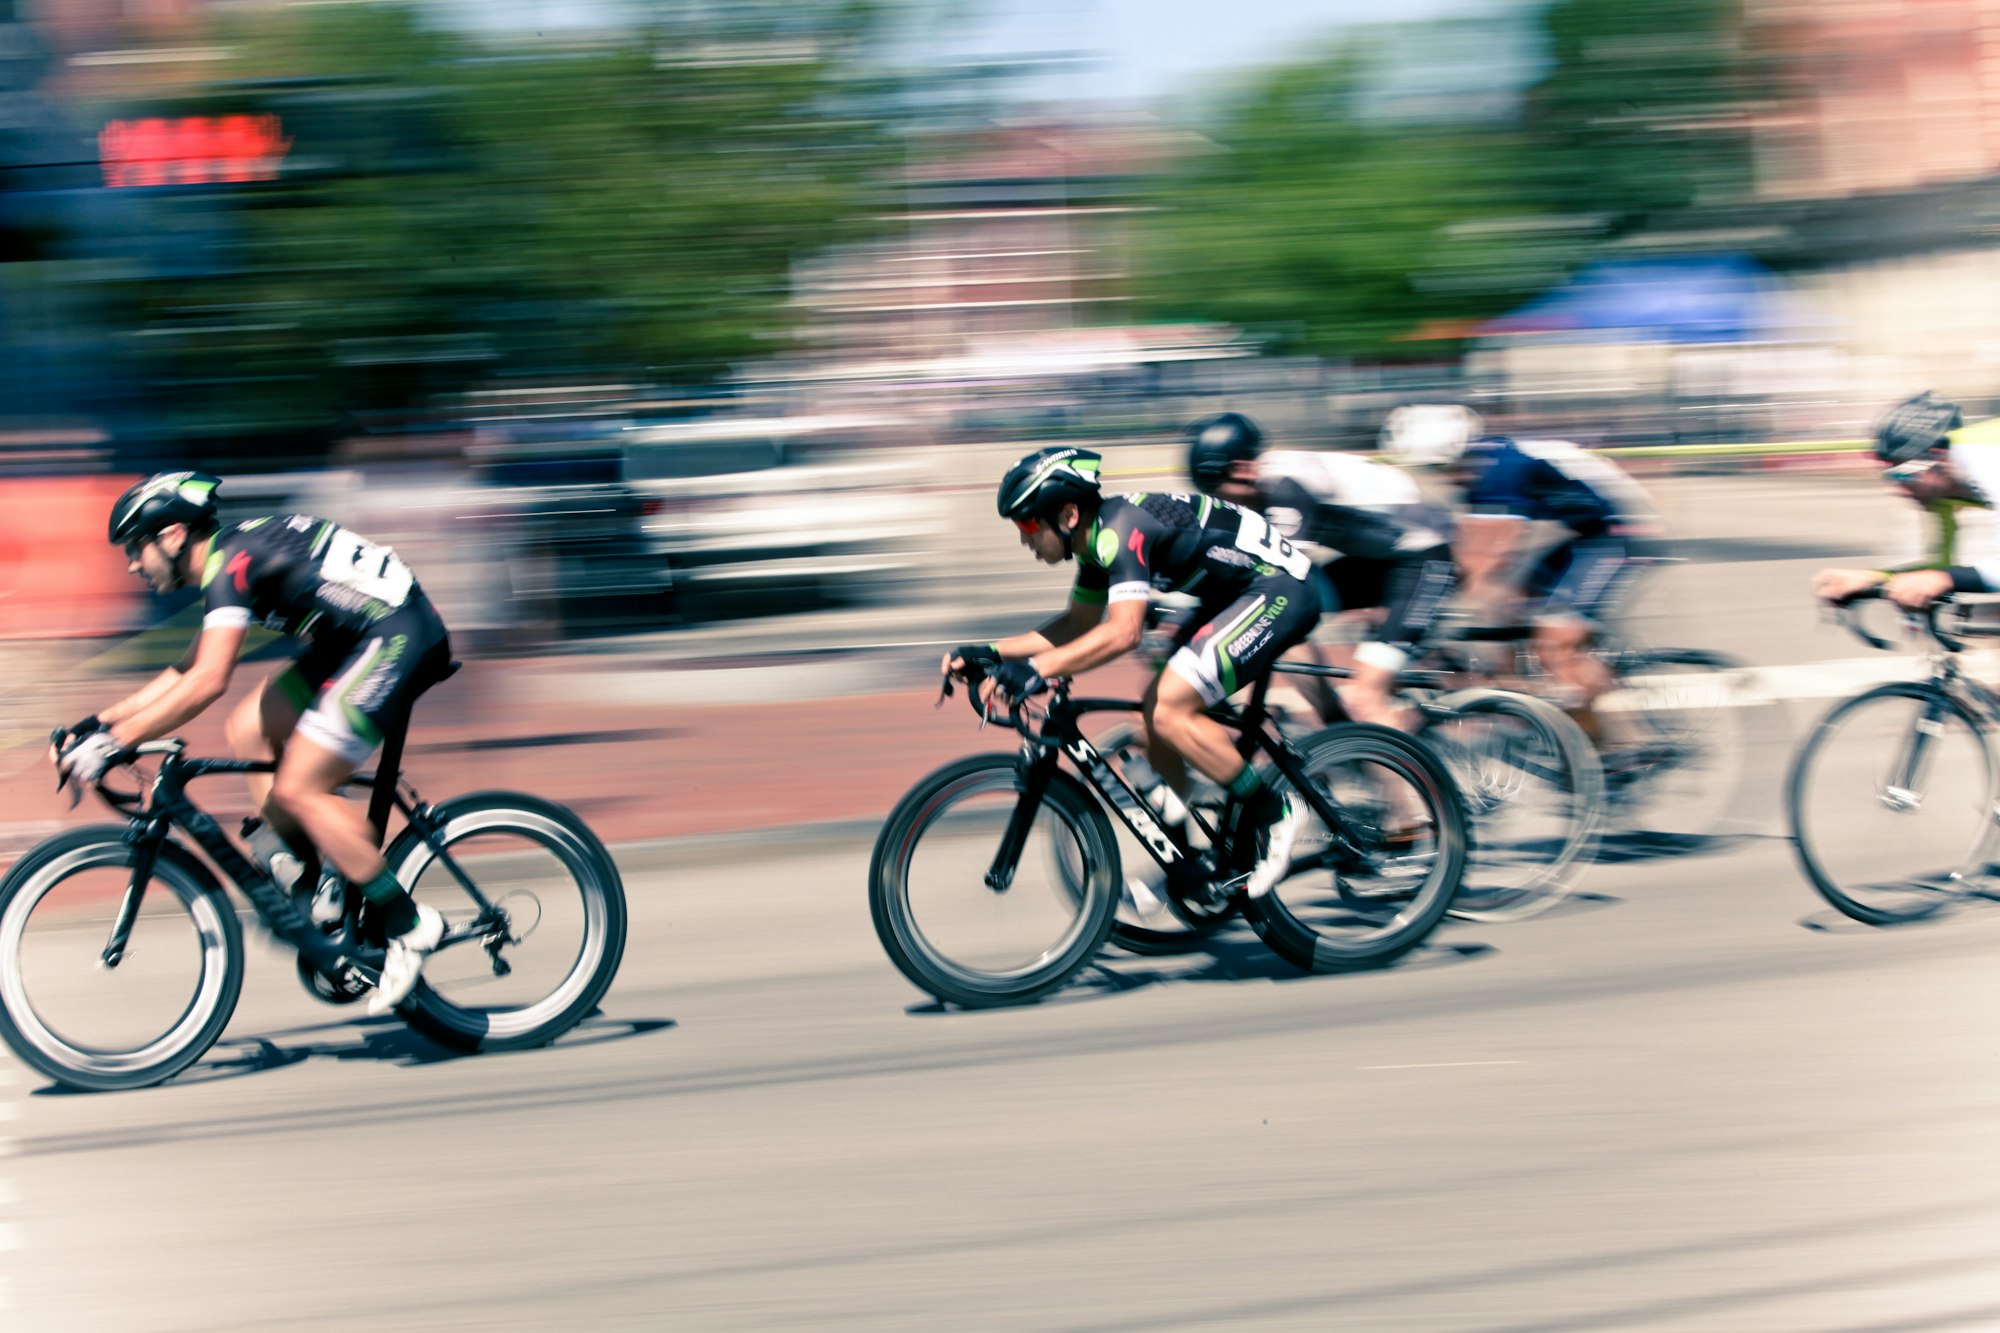 Annual Portsmouth Criterium. A yearly road race used to be held on closed city streets in September.